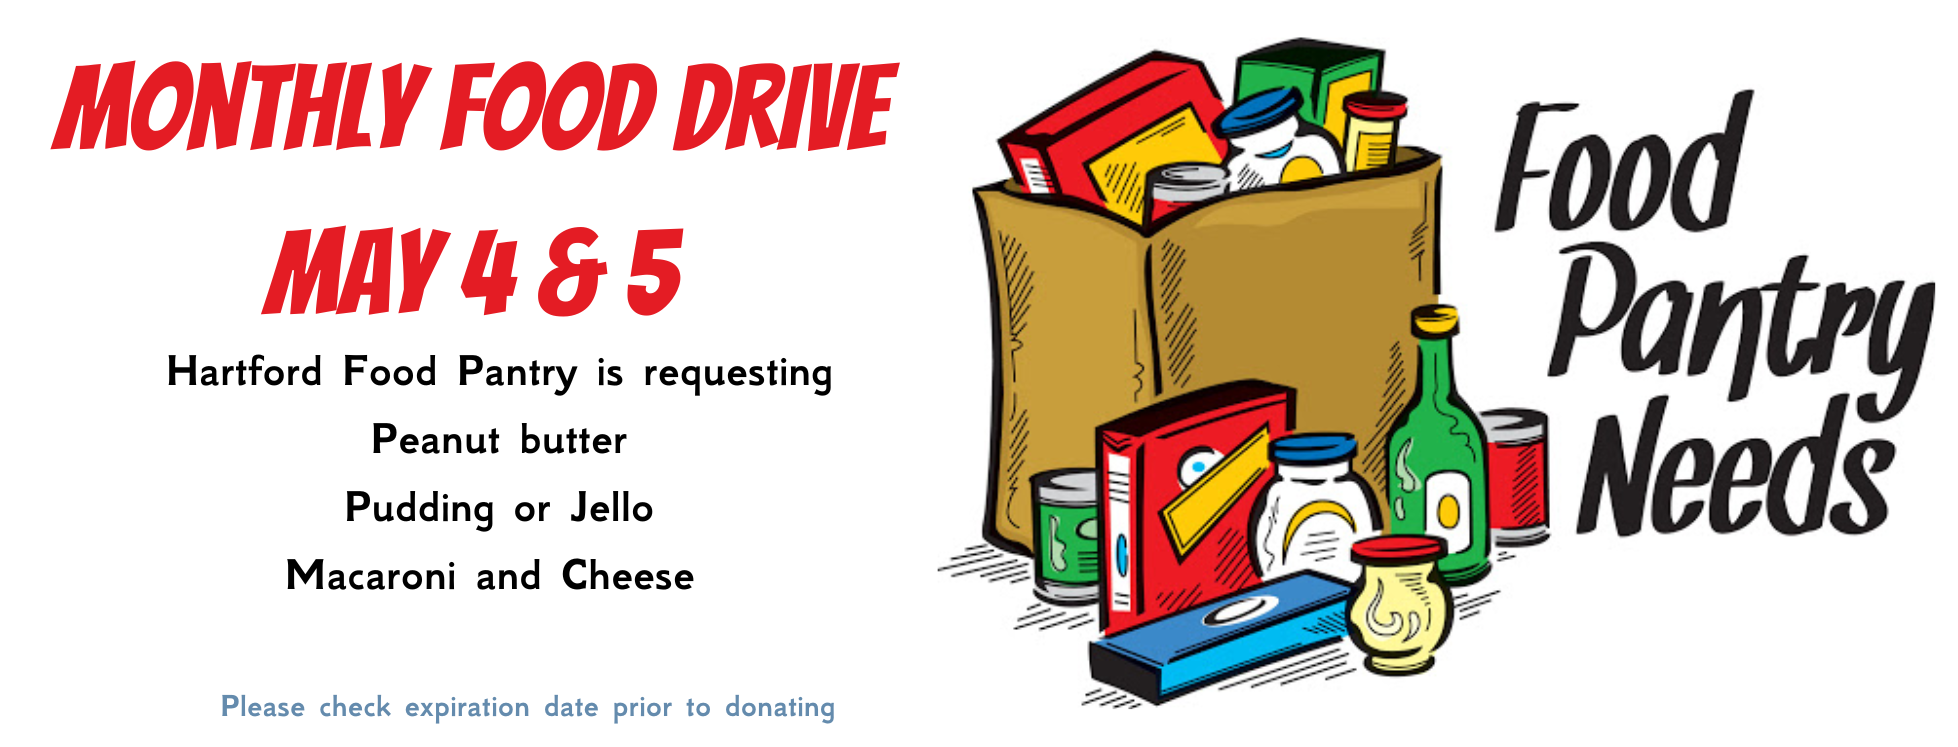 Monthly Food Drive